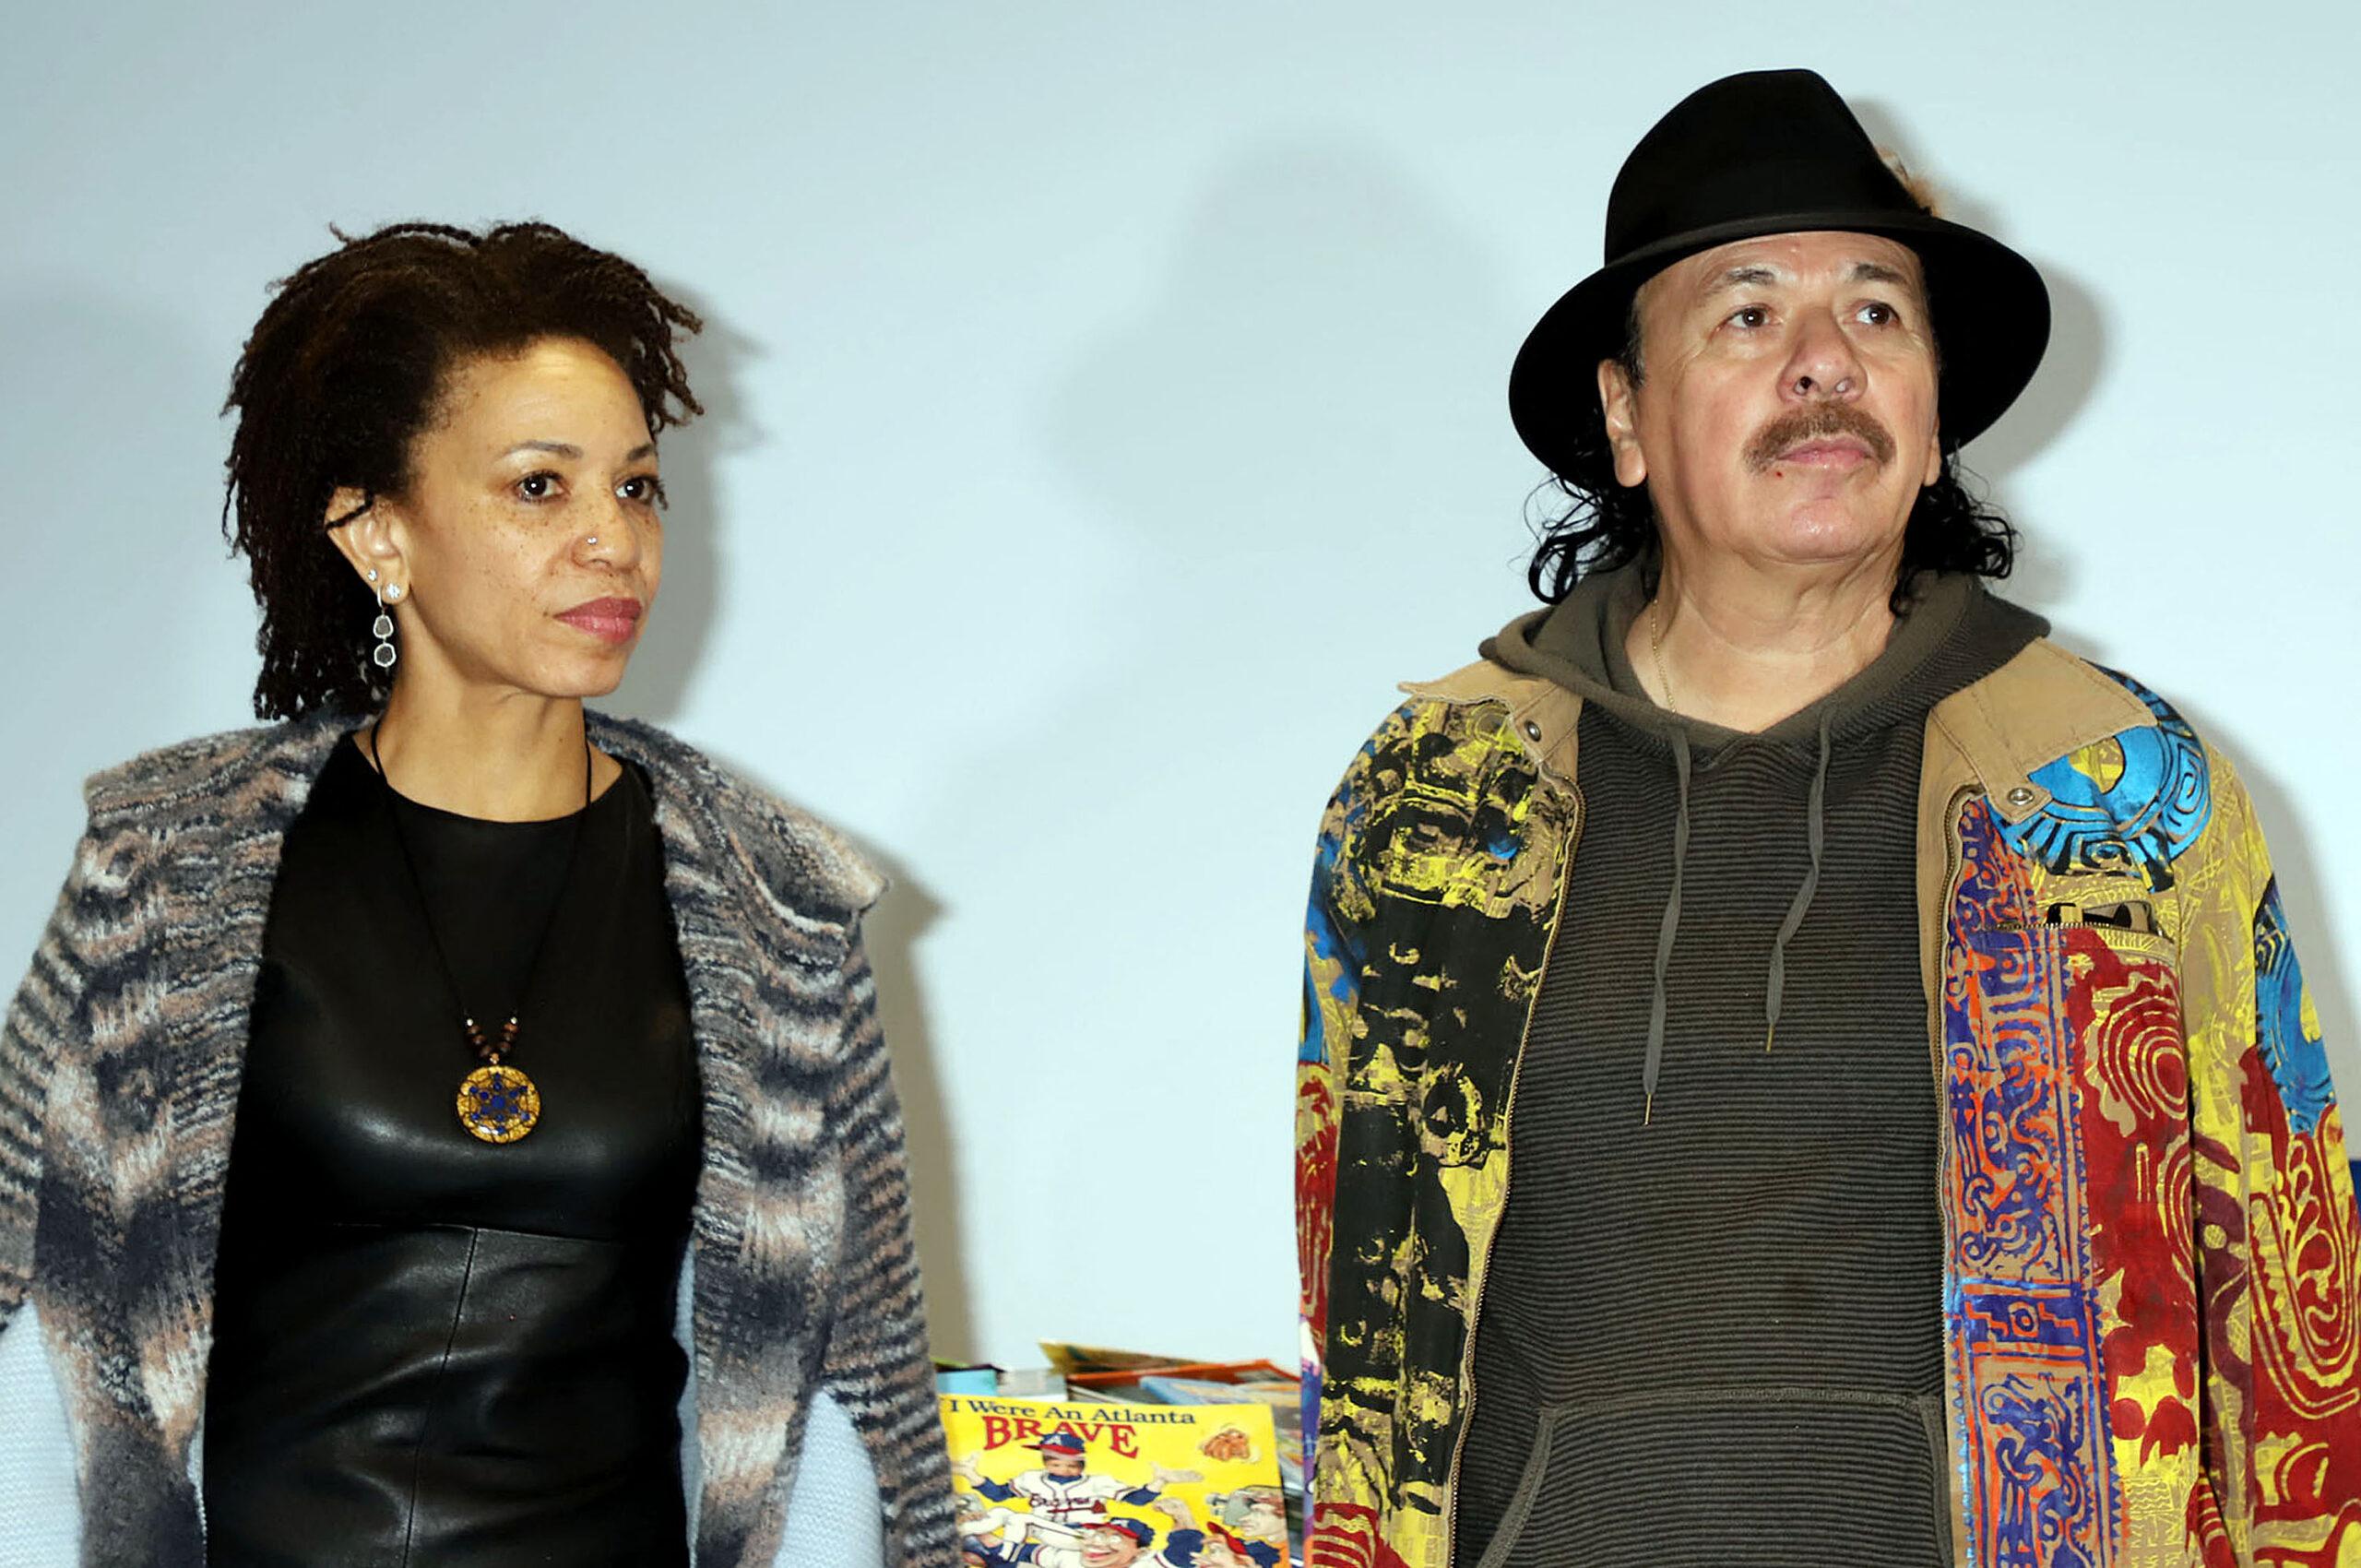 Carlos Santana Gushes About His Marriage To Second Wife Cindy Blackman, Says He Prayed For A 'Queen'